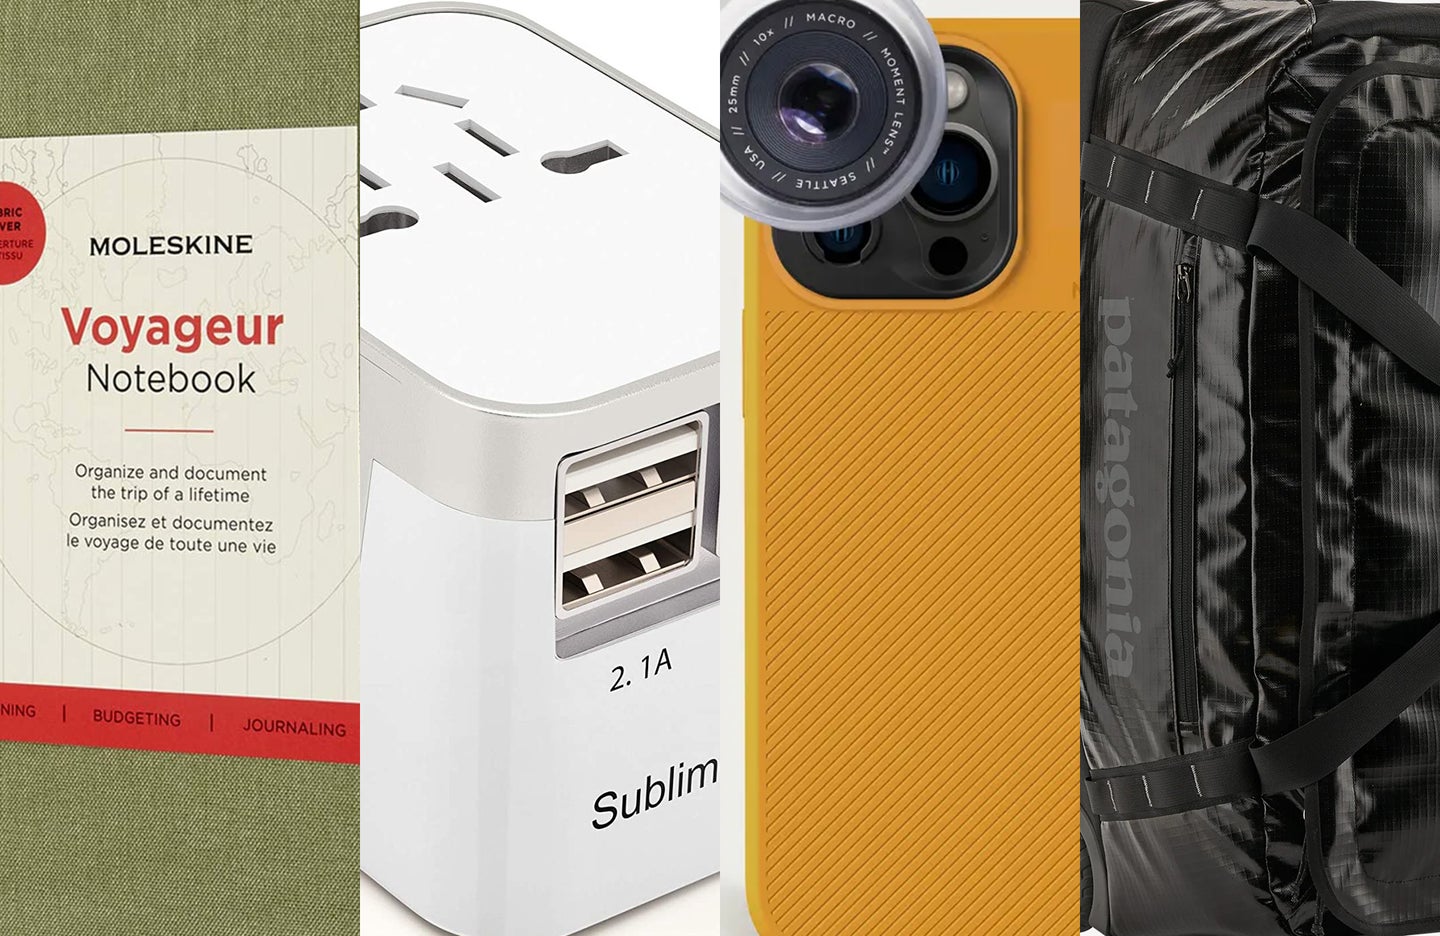 The best gifts for the travel-obsessed photographer